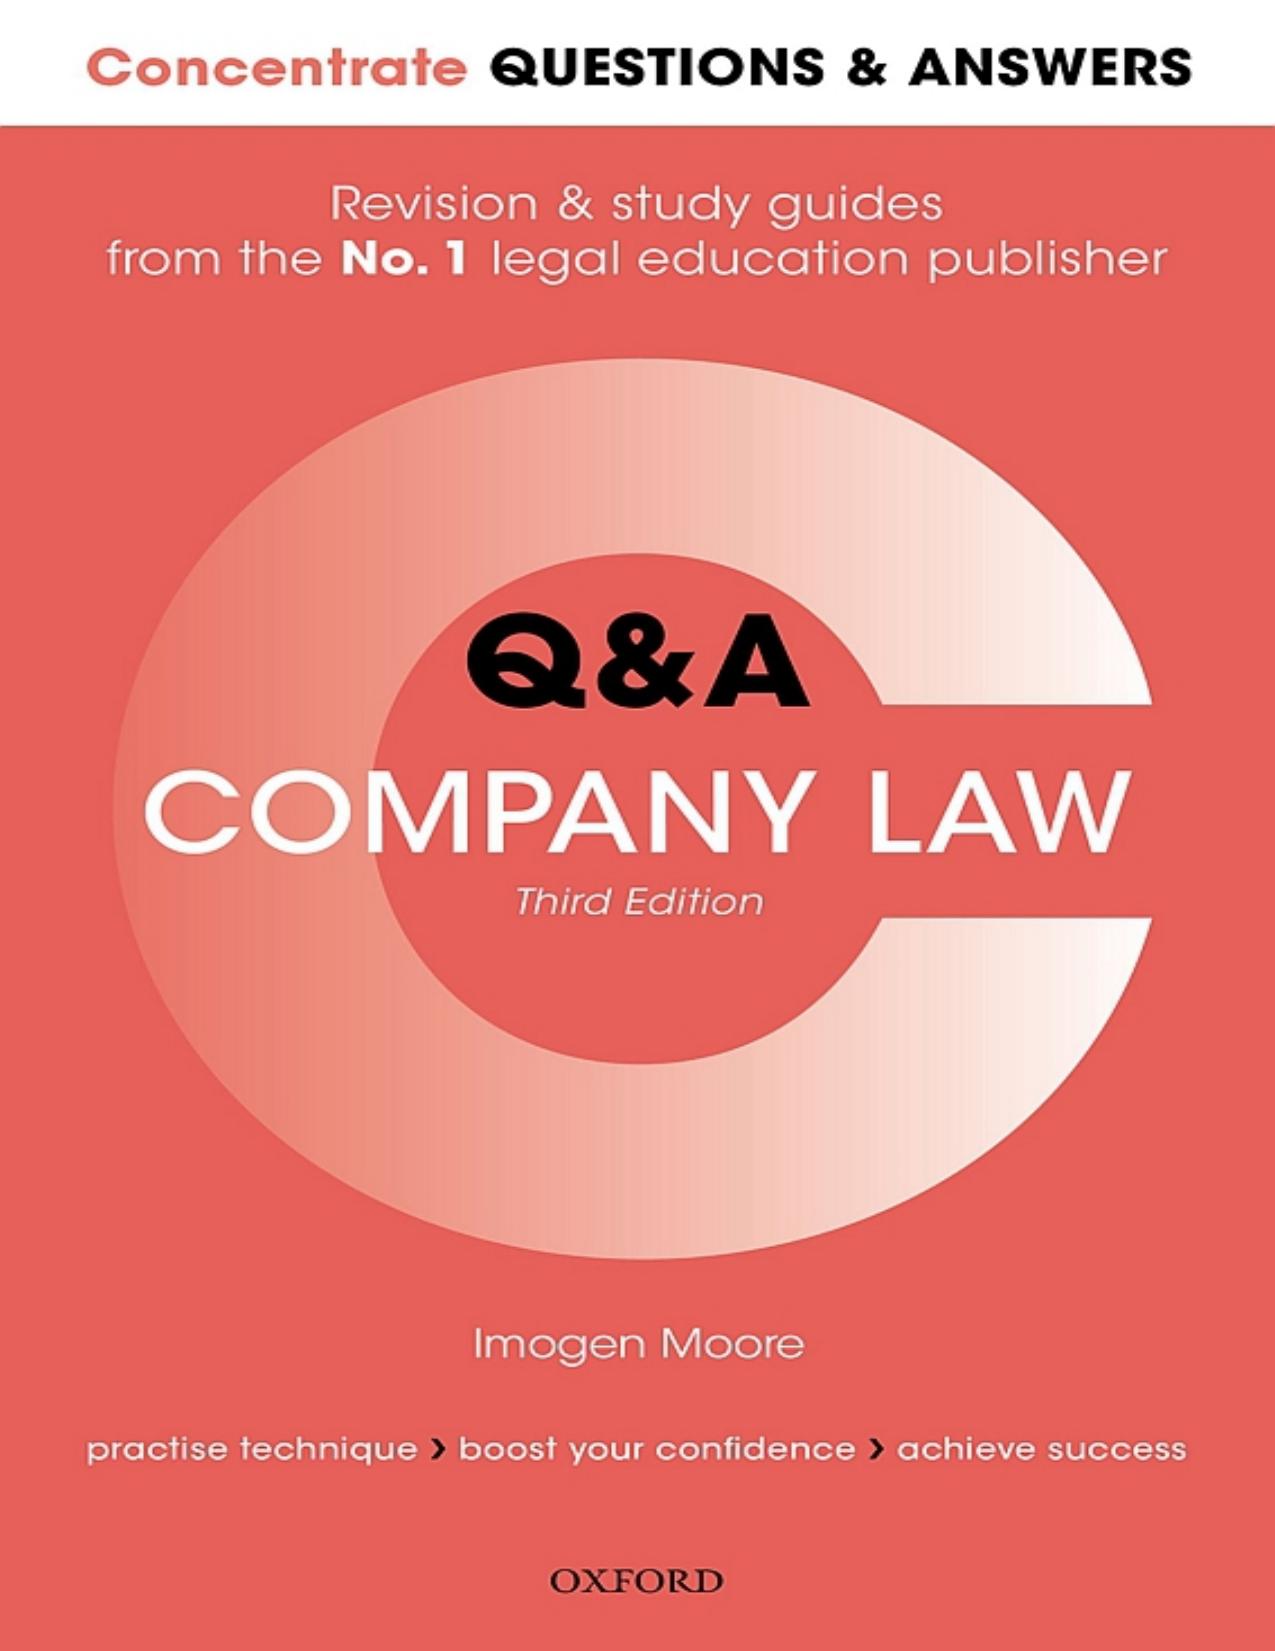 (eBook PDF)Concentrate Questions and Answers Company Law Law Q&A Revision centrate Questions & Answers) 3rd - Imogen Moore - Imogen Moore by Imogen Moore